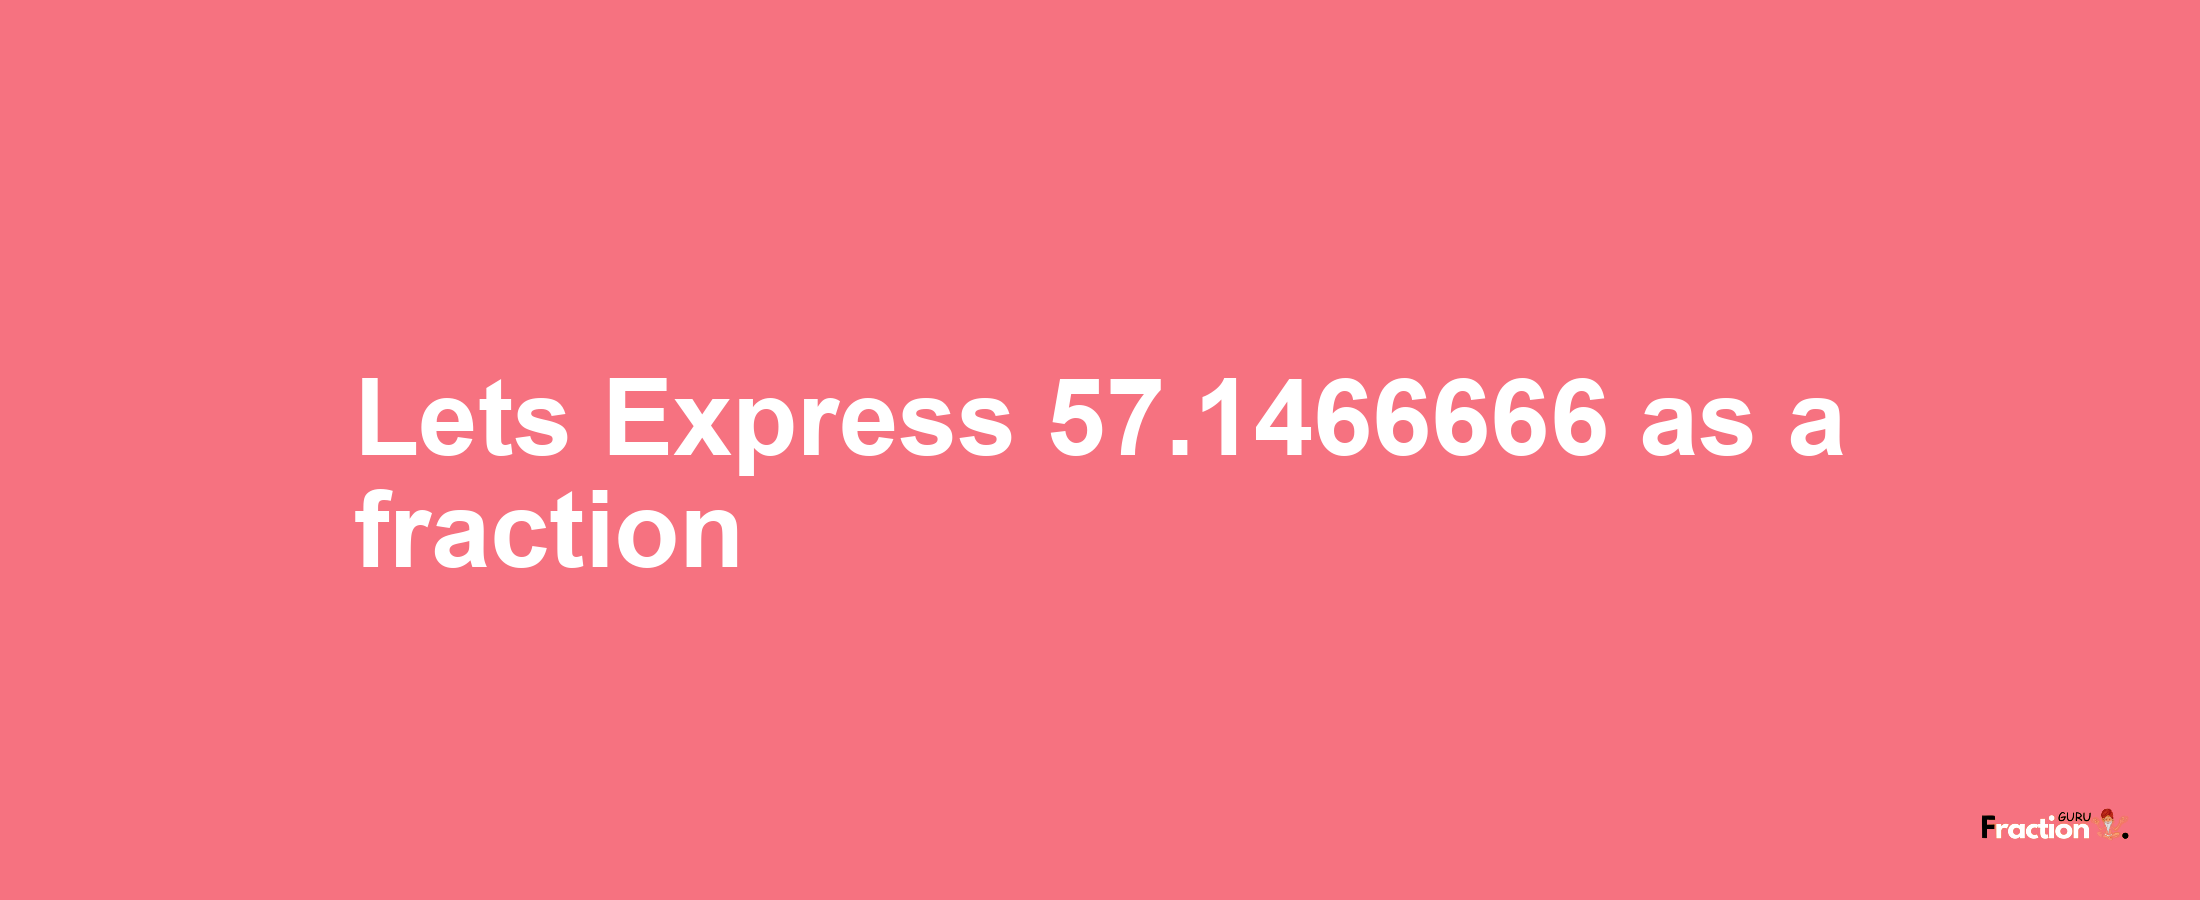 Lets Express 57.1466666 as afraction